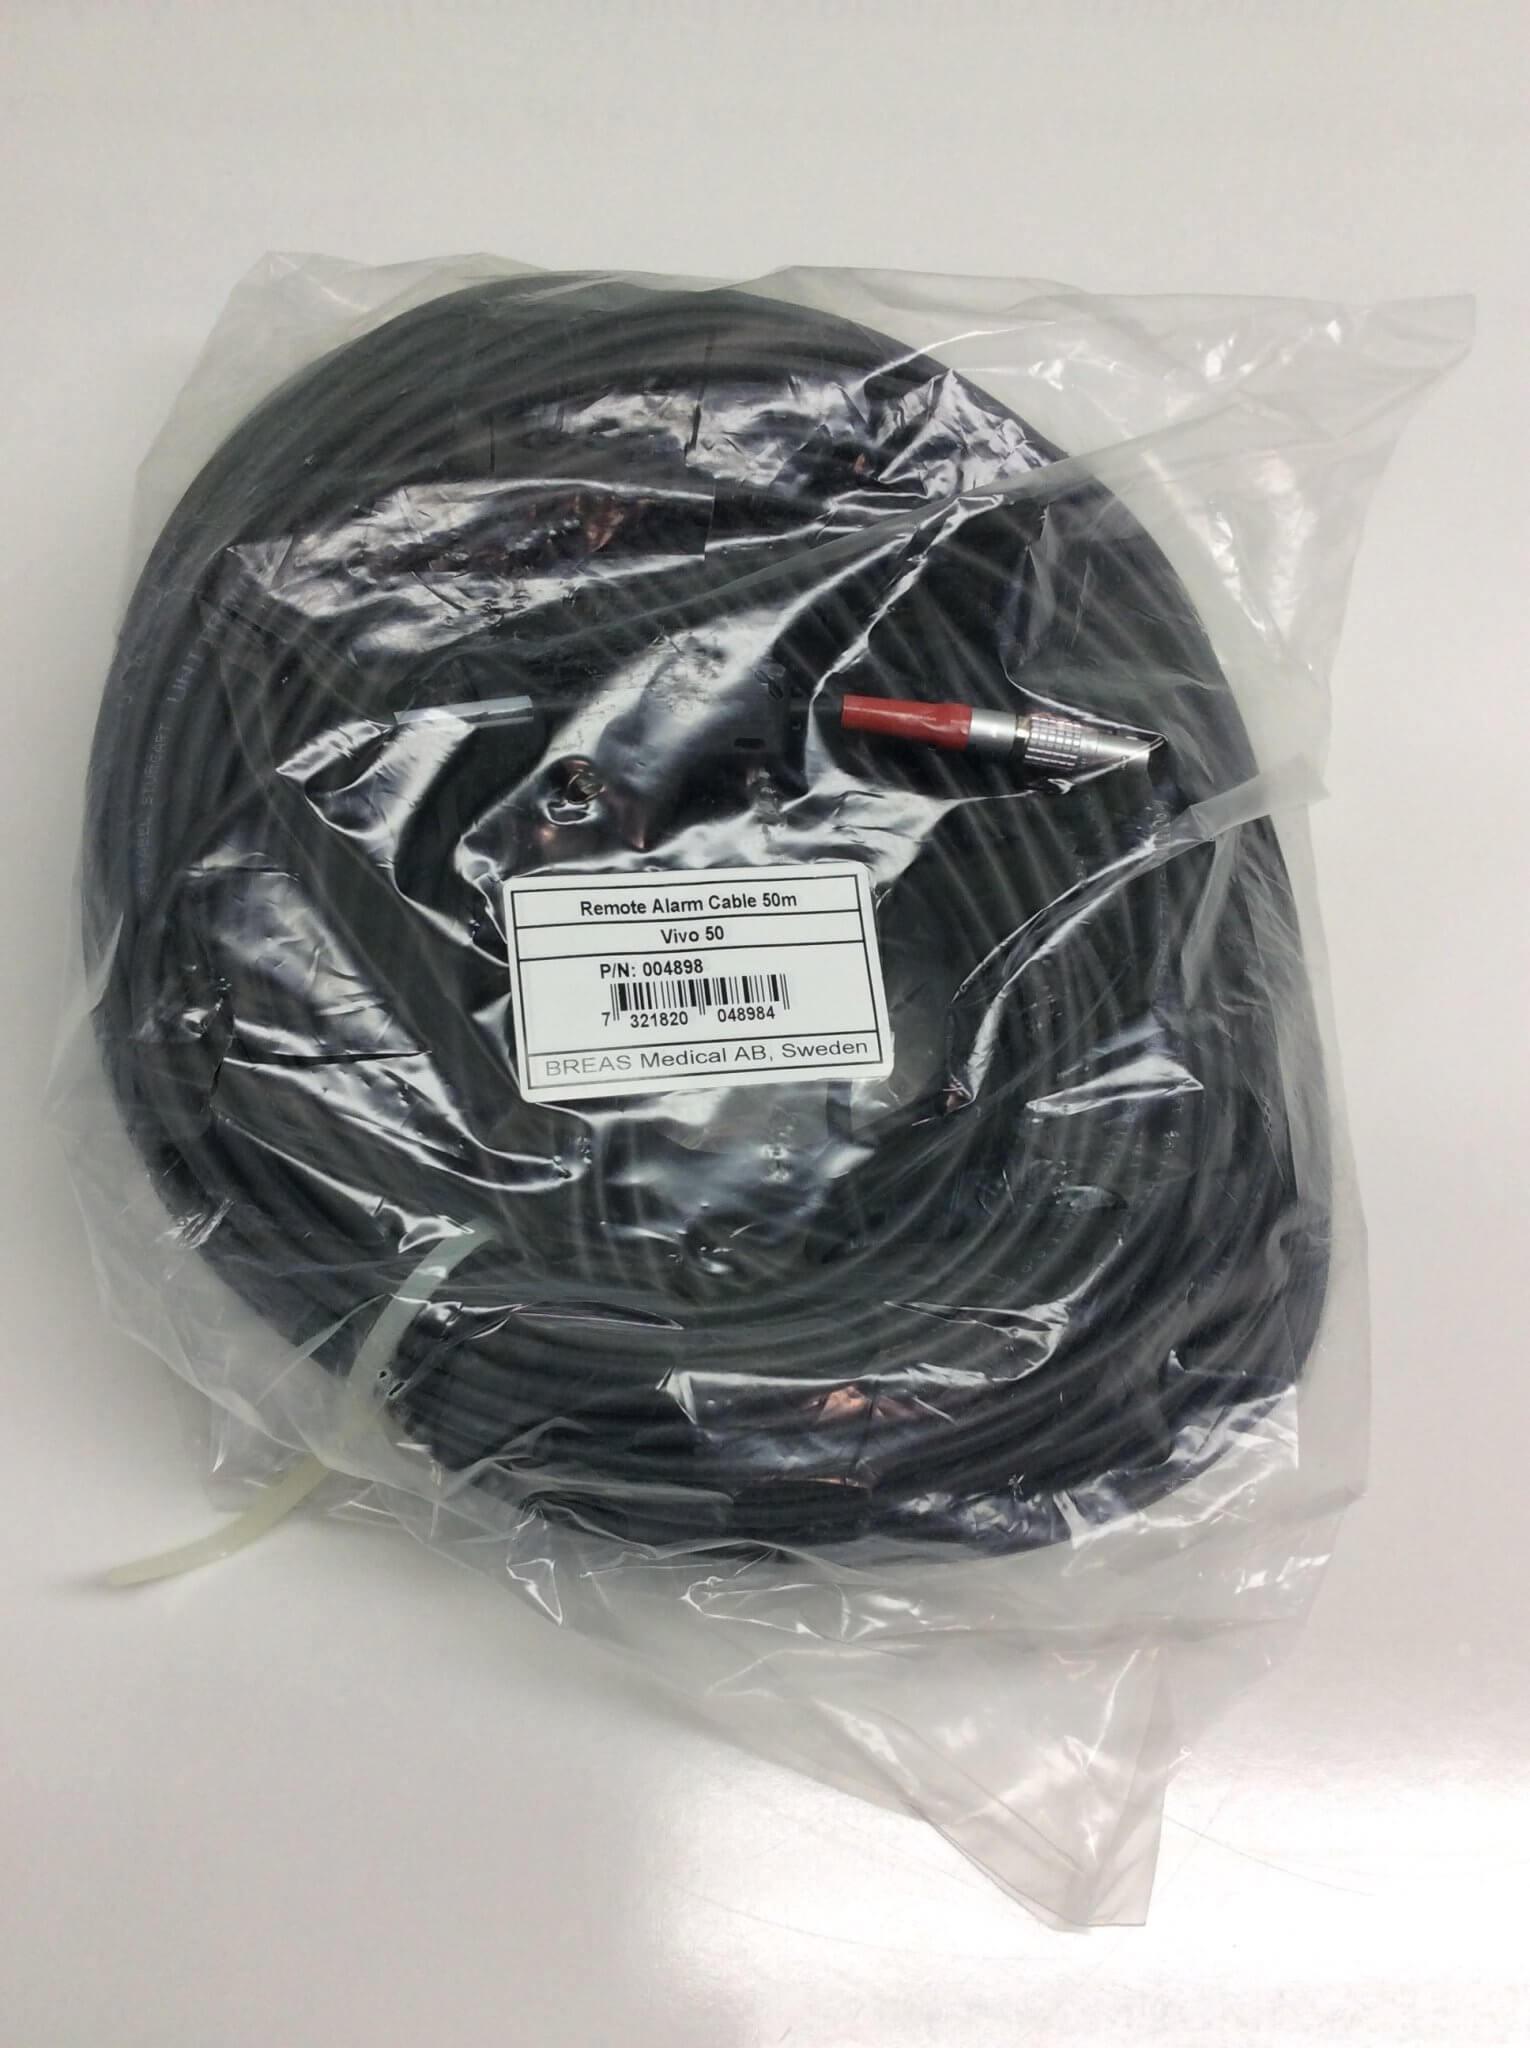 NEW Breas HDM Remote Alarm 50M Cable for the Vivo 50 60 004898 Warranty FREE Shipping - MBR Medicals